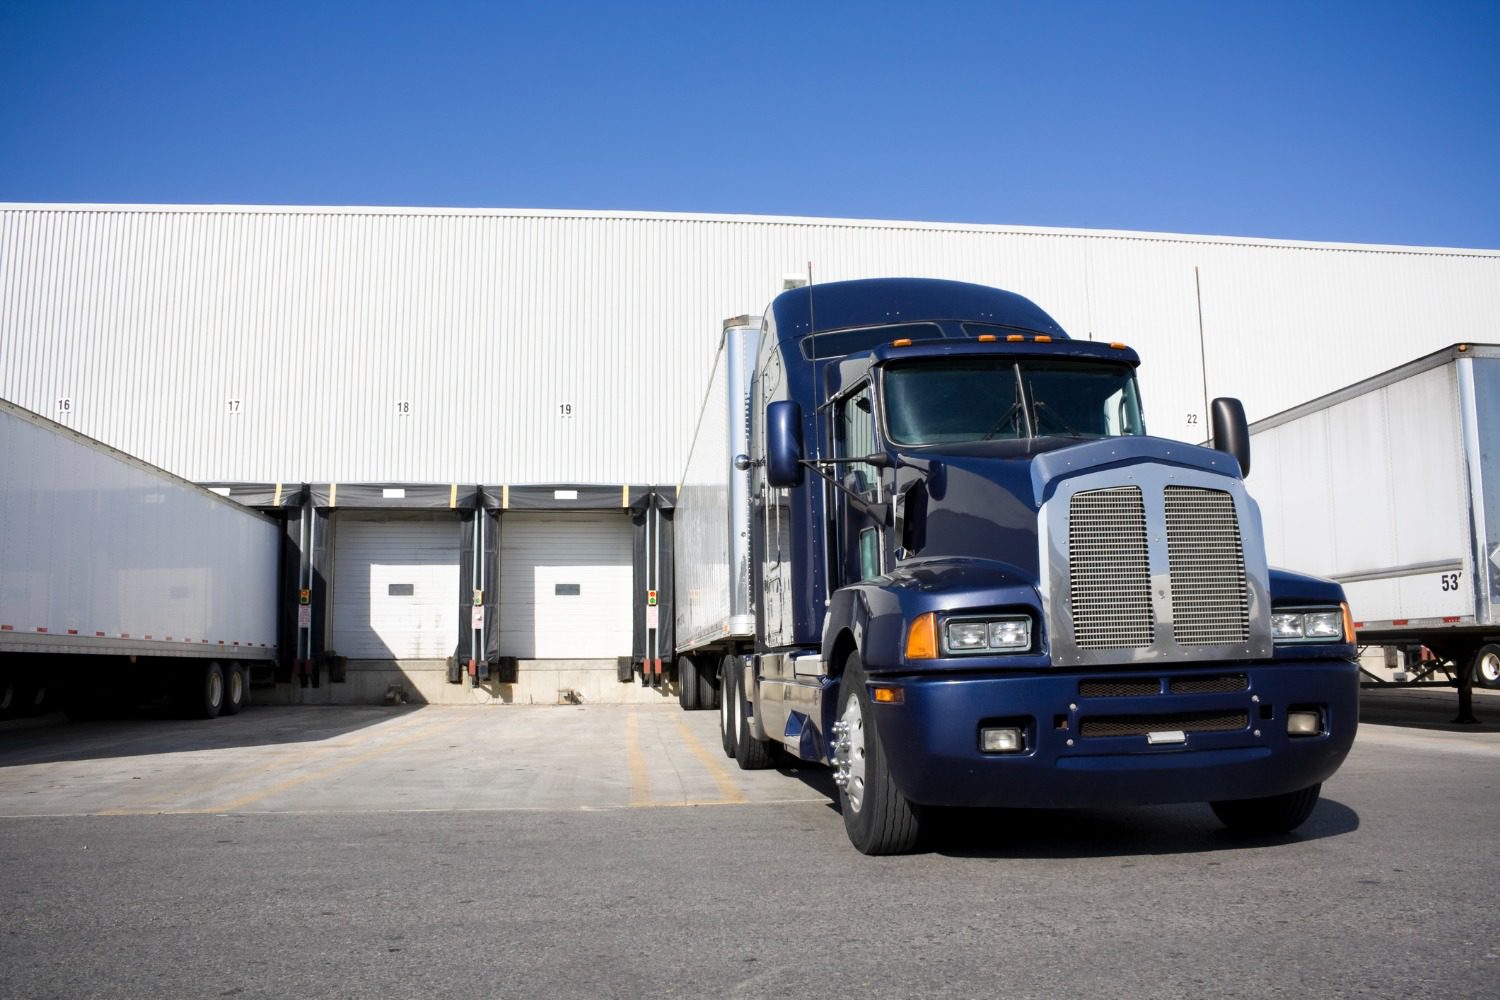 How Much Is Semi Truck Insurance?